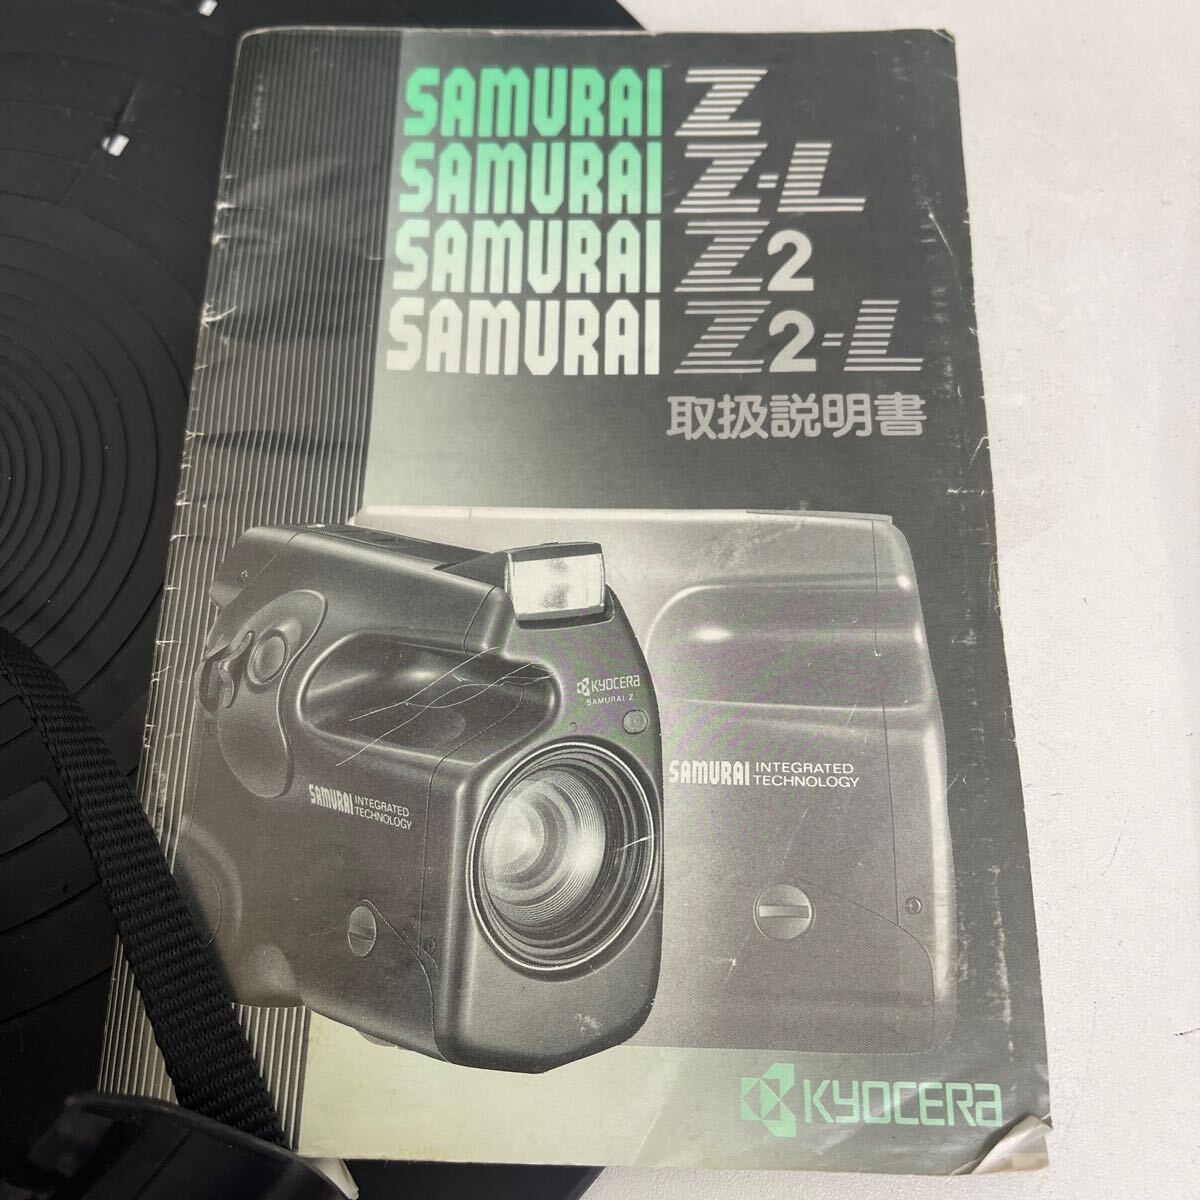 Y507. 10. kyocera Kyocera SAMURAI Z2 f=25.-75.1:4.0-5.6 compact film camera operation is unconfirmed. goods present condition delivery original box instructions attaching 